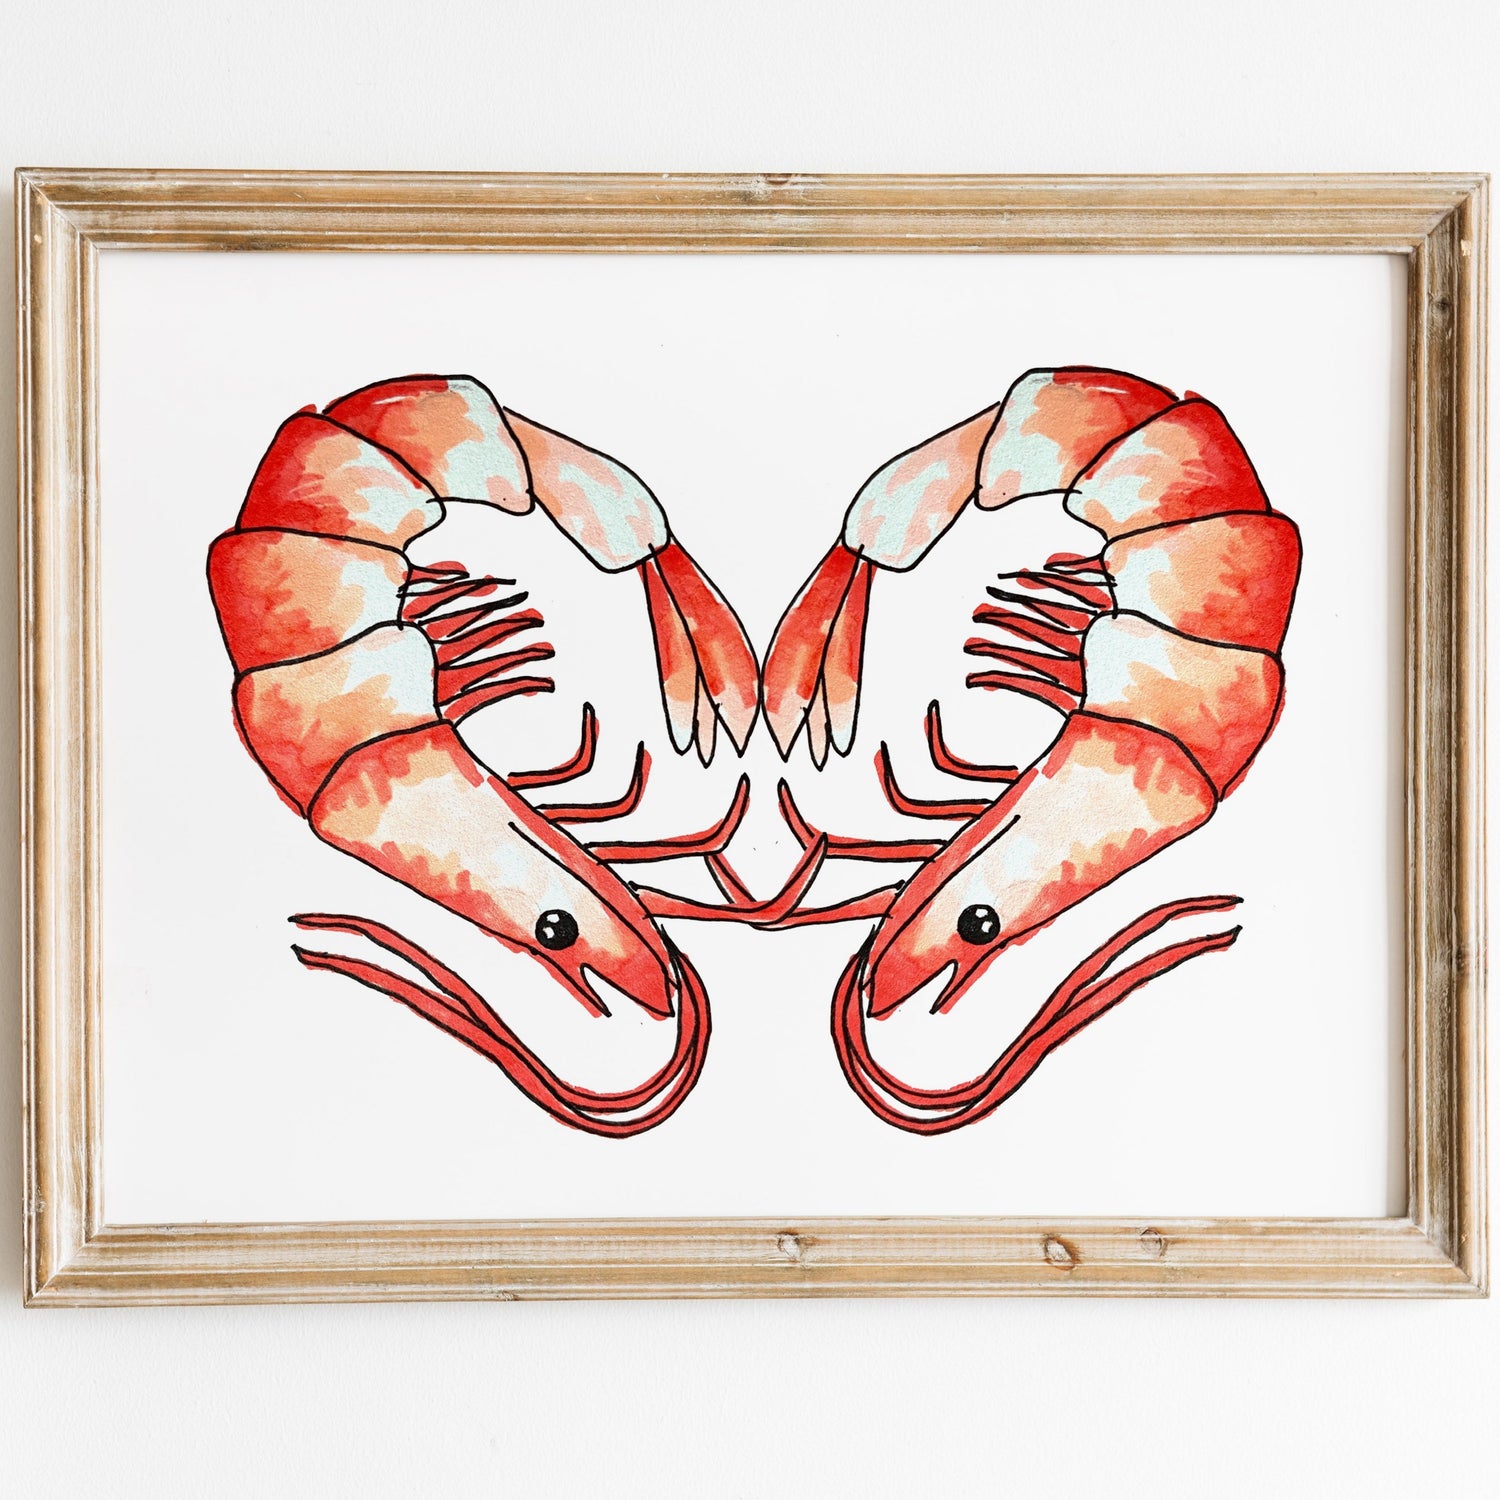 wall art of two shrimp in the shape of a heart